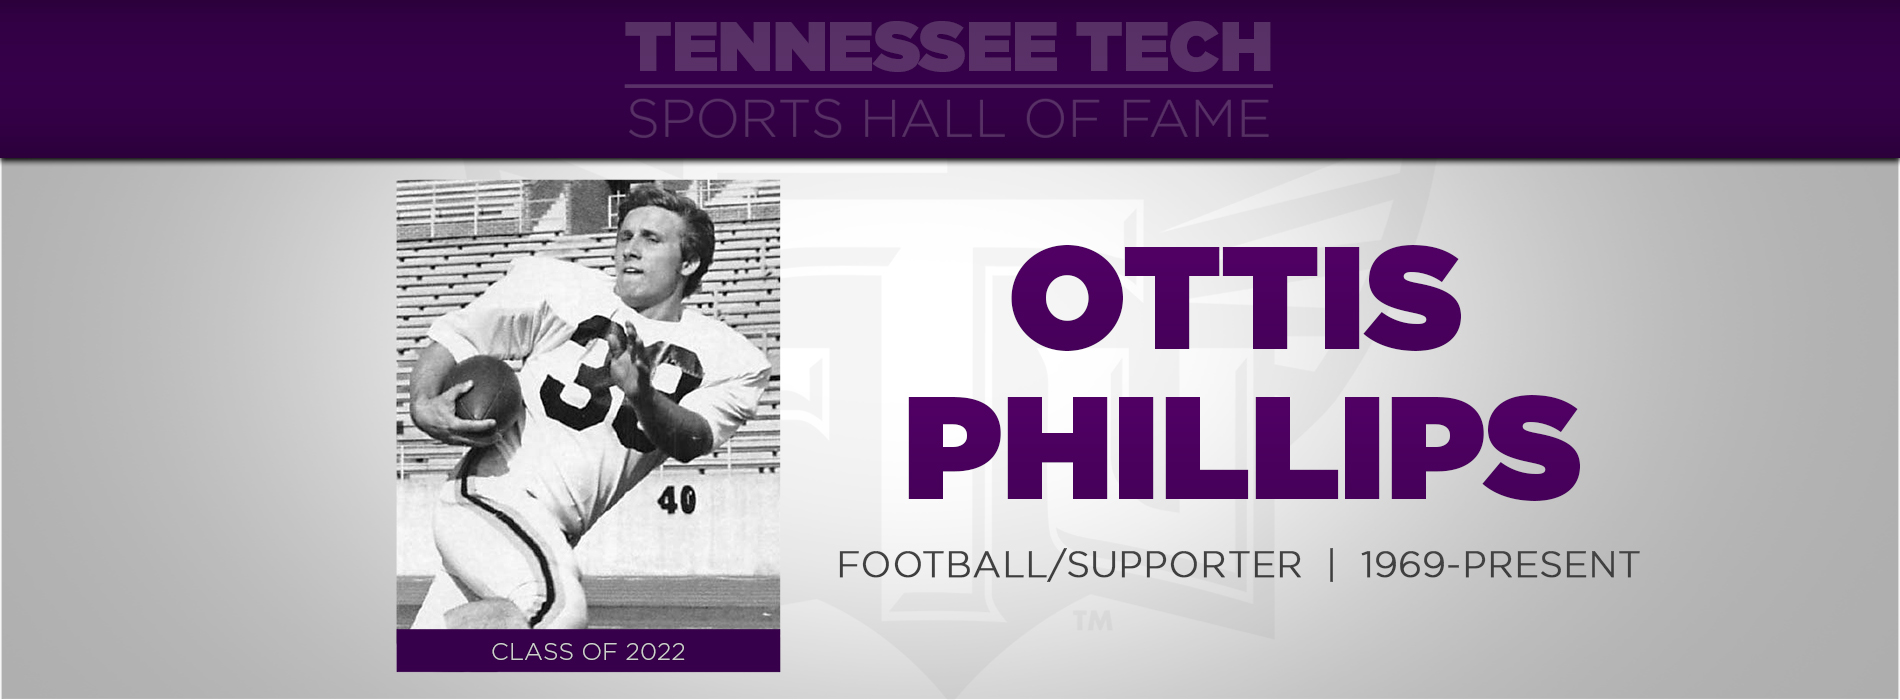 Phillips to be inducted into TTU Sports Hall of Fame Friday, Nov. 4